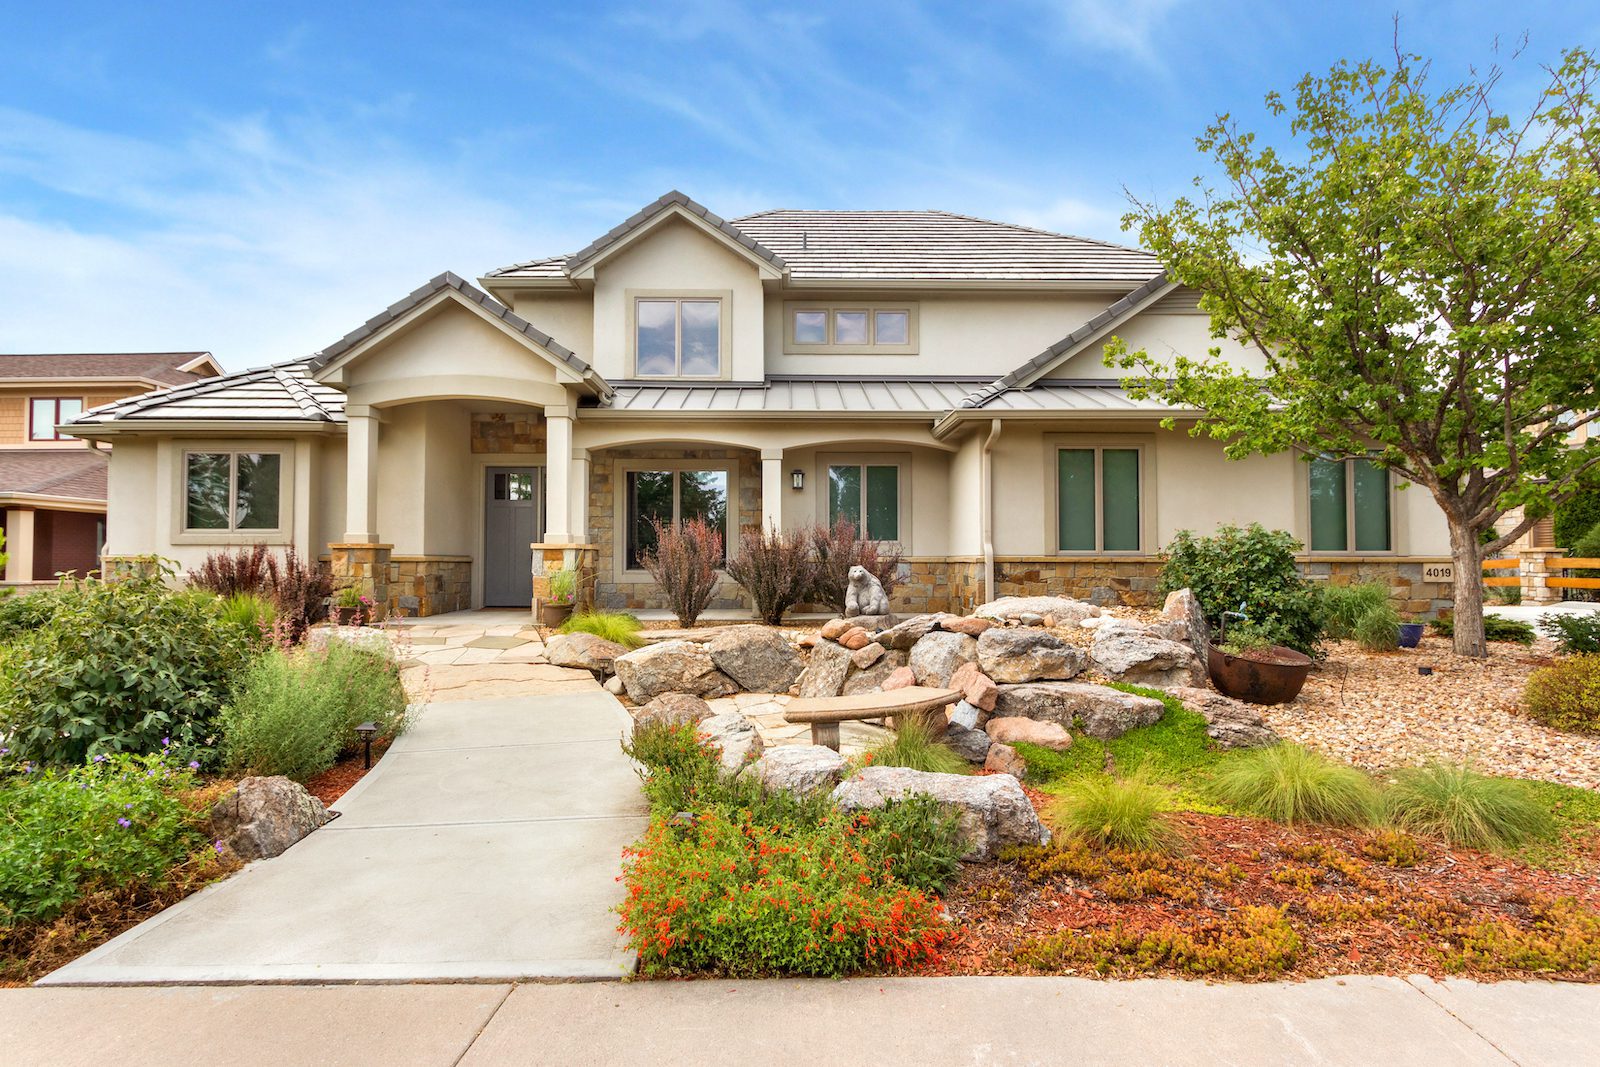 Landscaping Services Greeley, CO